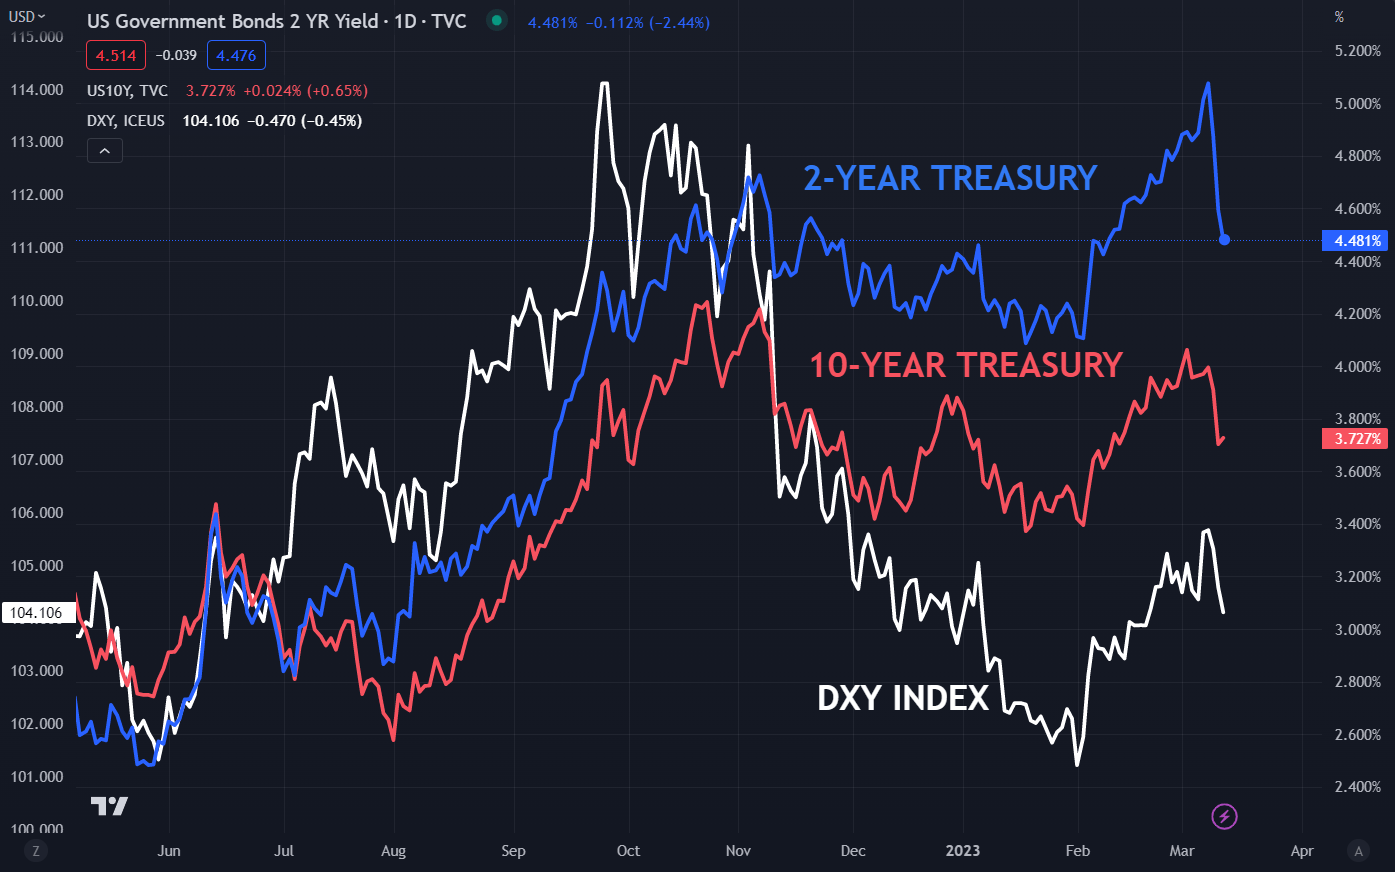 DXY/USD INDEX AGAINST TREASURY 2 AND 10 YEAR YIELDS